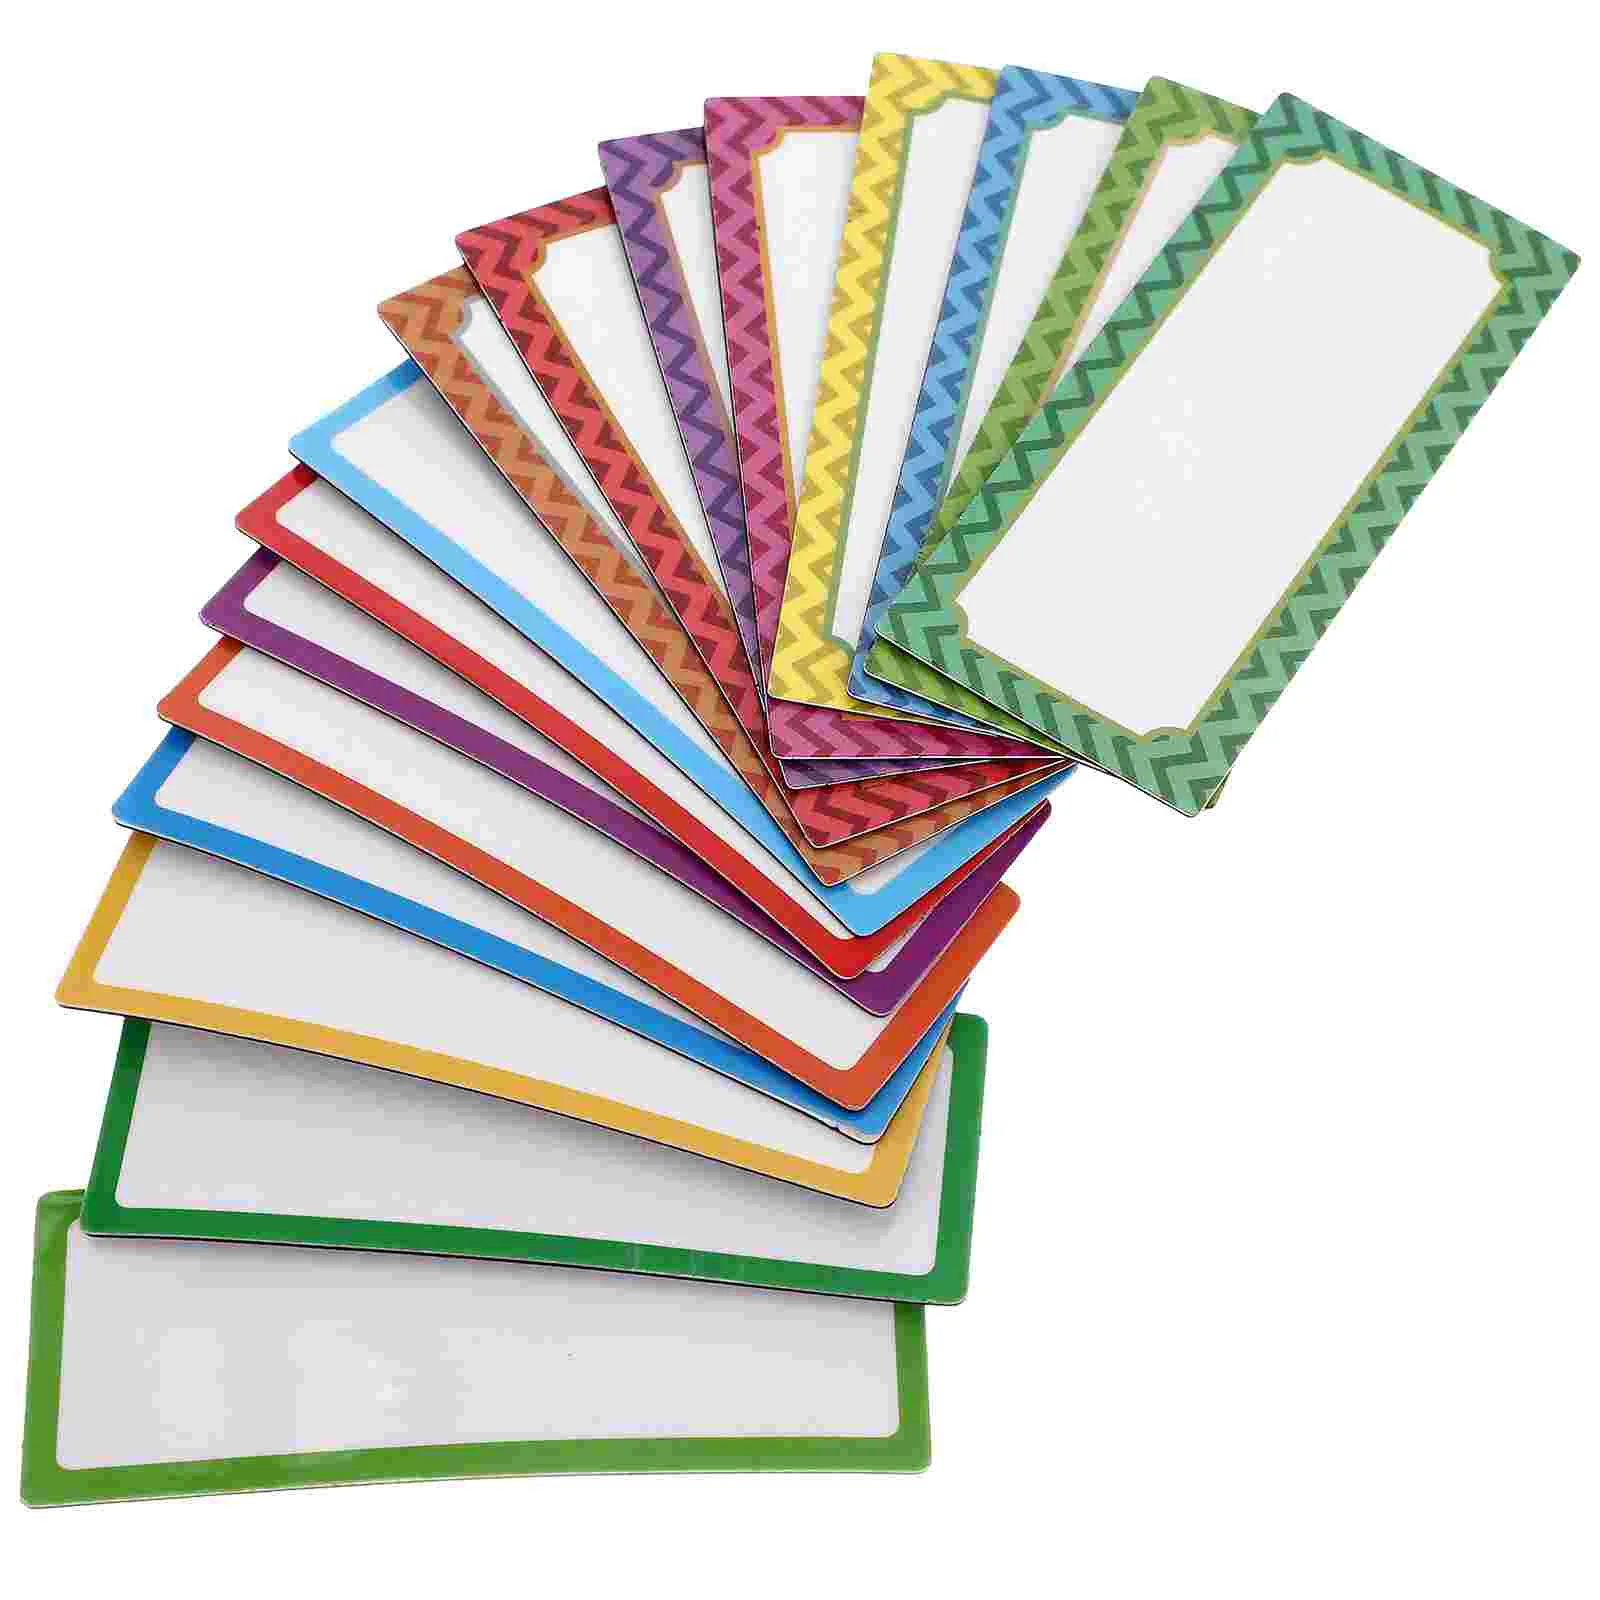 

16pcs Magnet Name Tags Colored Name Label Stickers for School Classroom Whiteboard